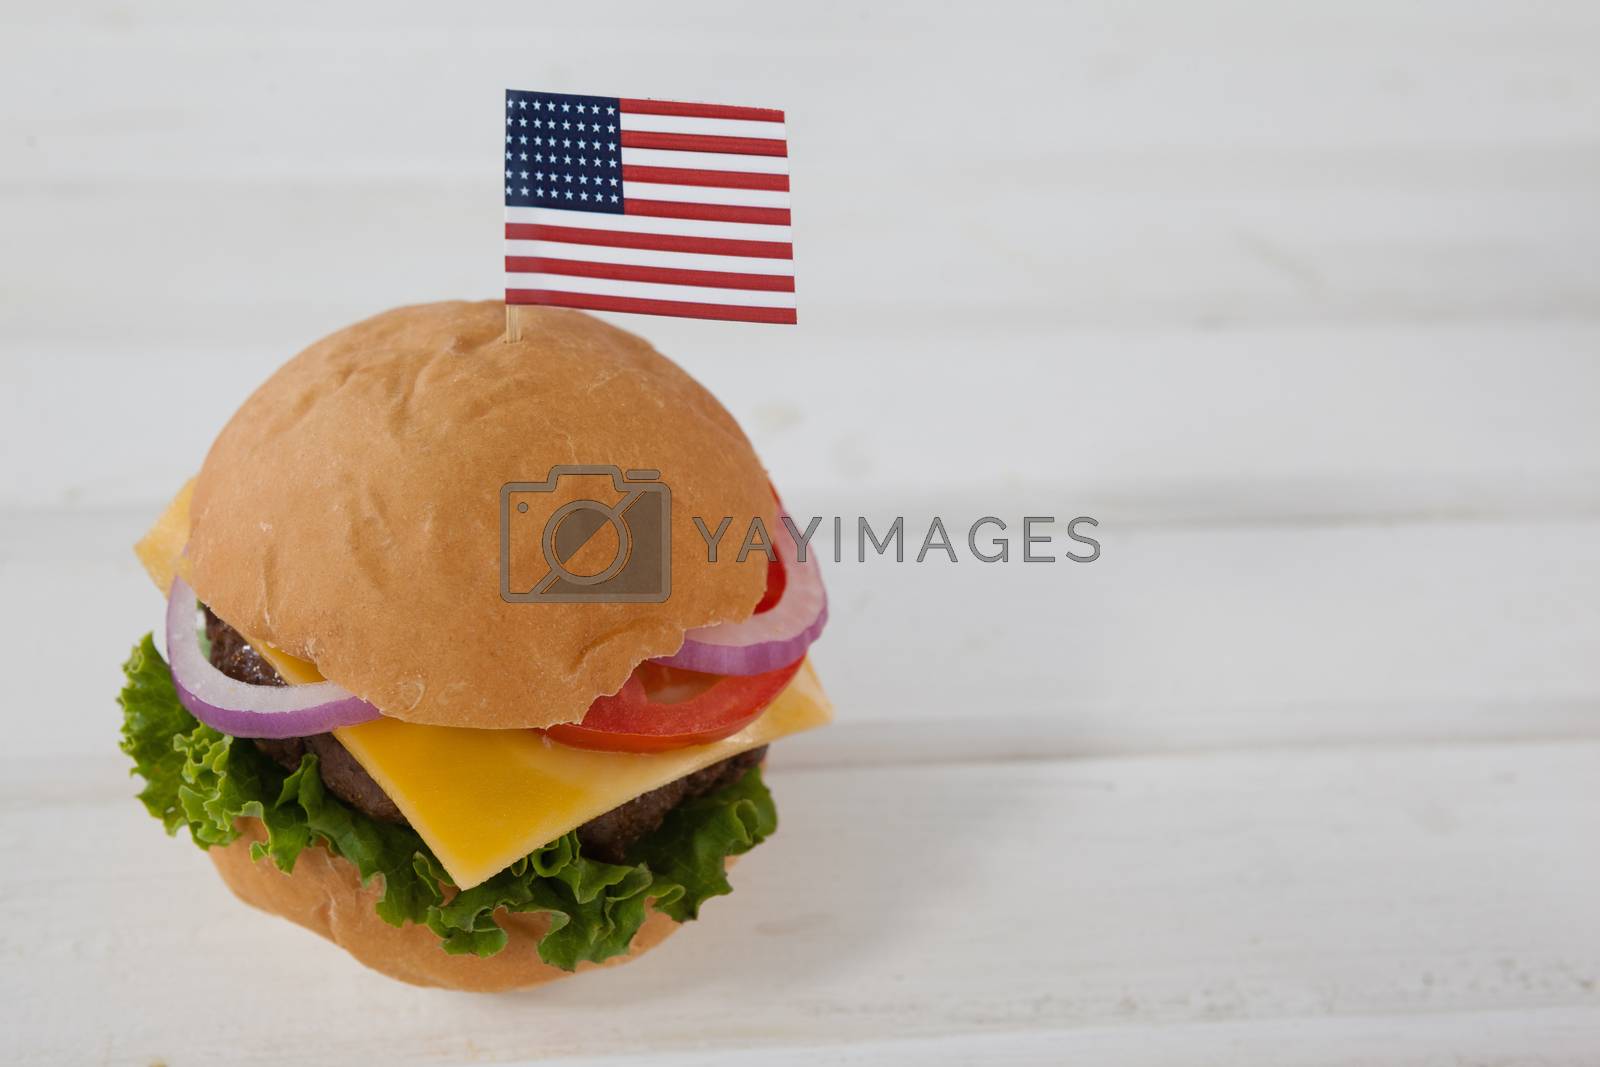 Royalty free image of Hamburger with 4th july theme by Wavebreakmedia